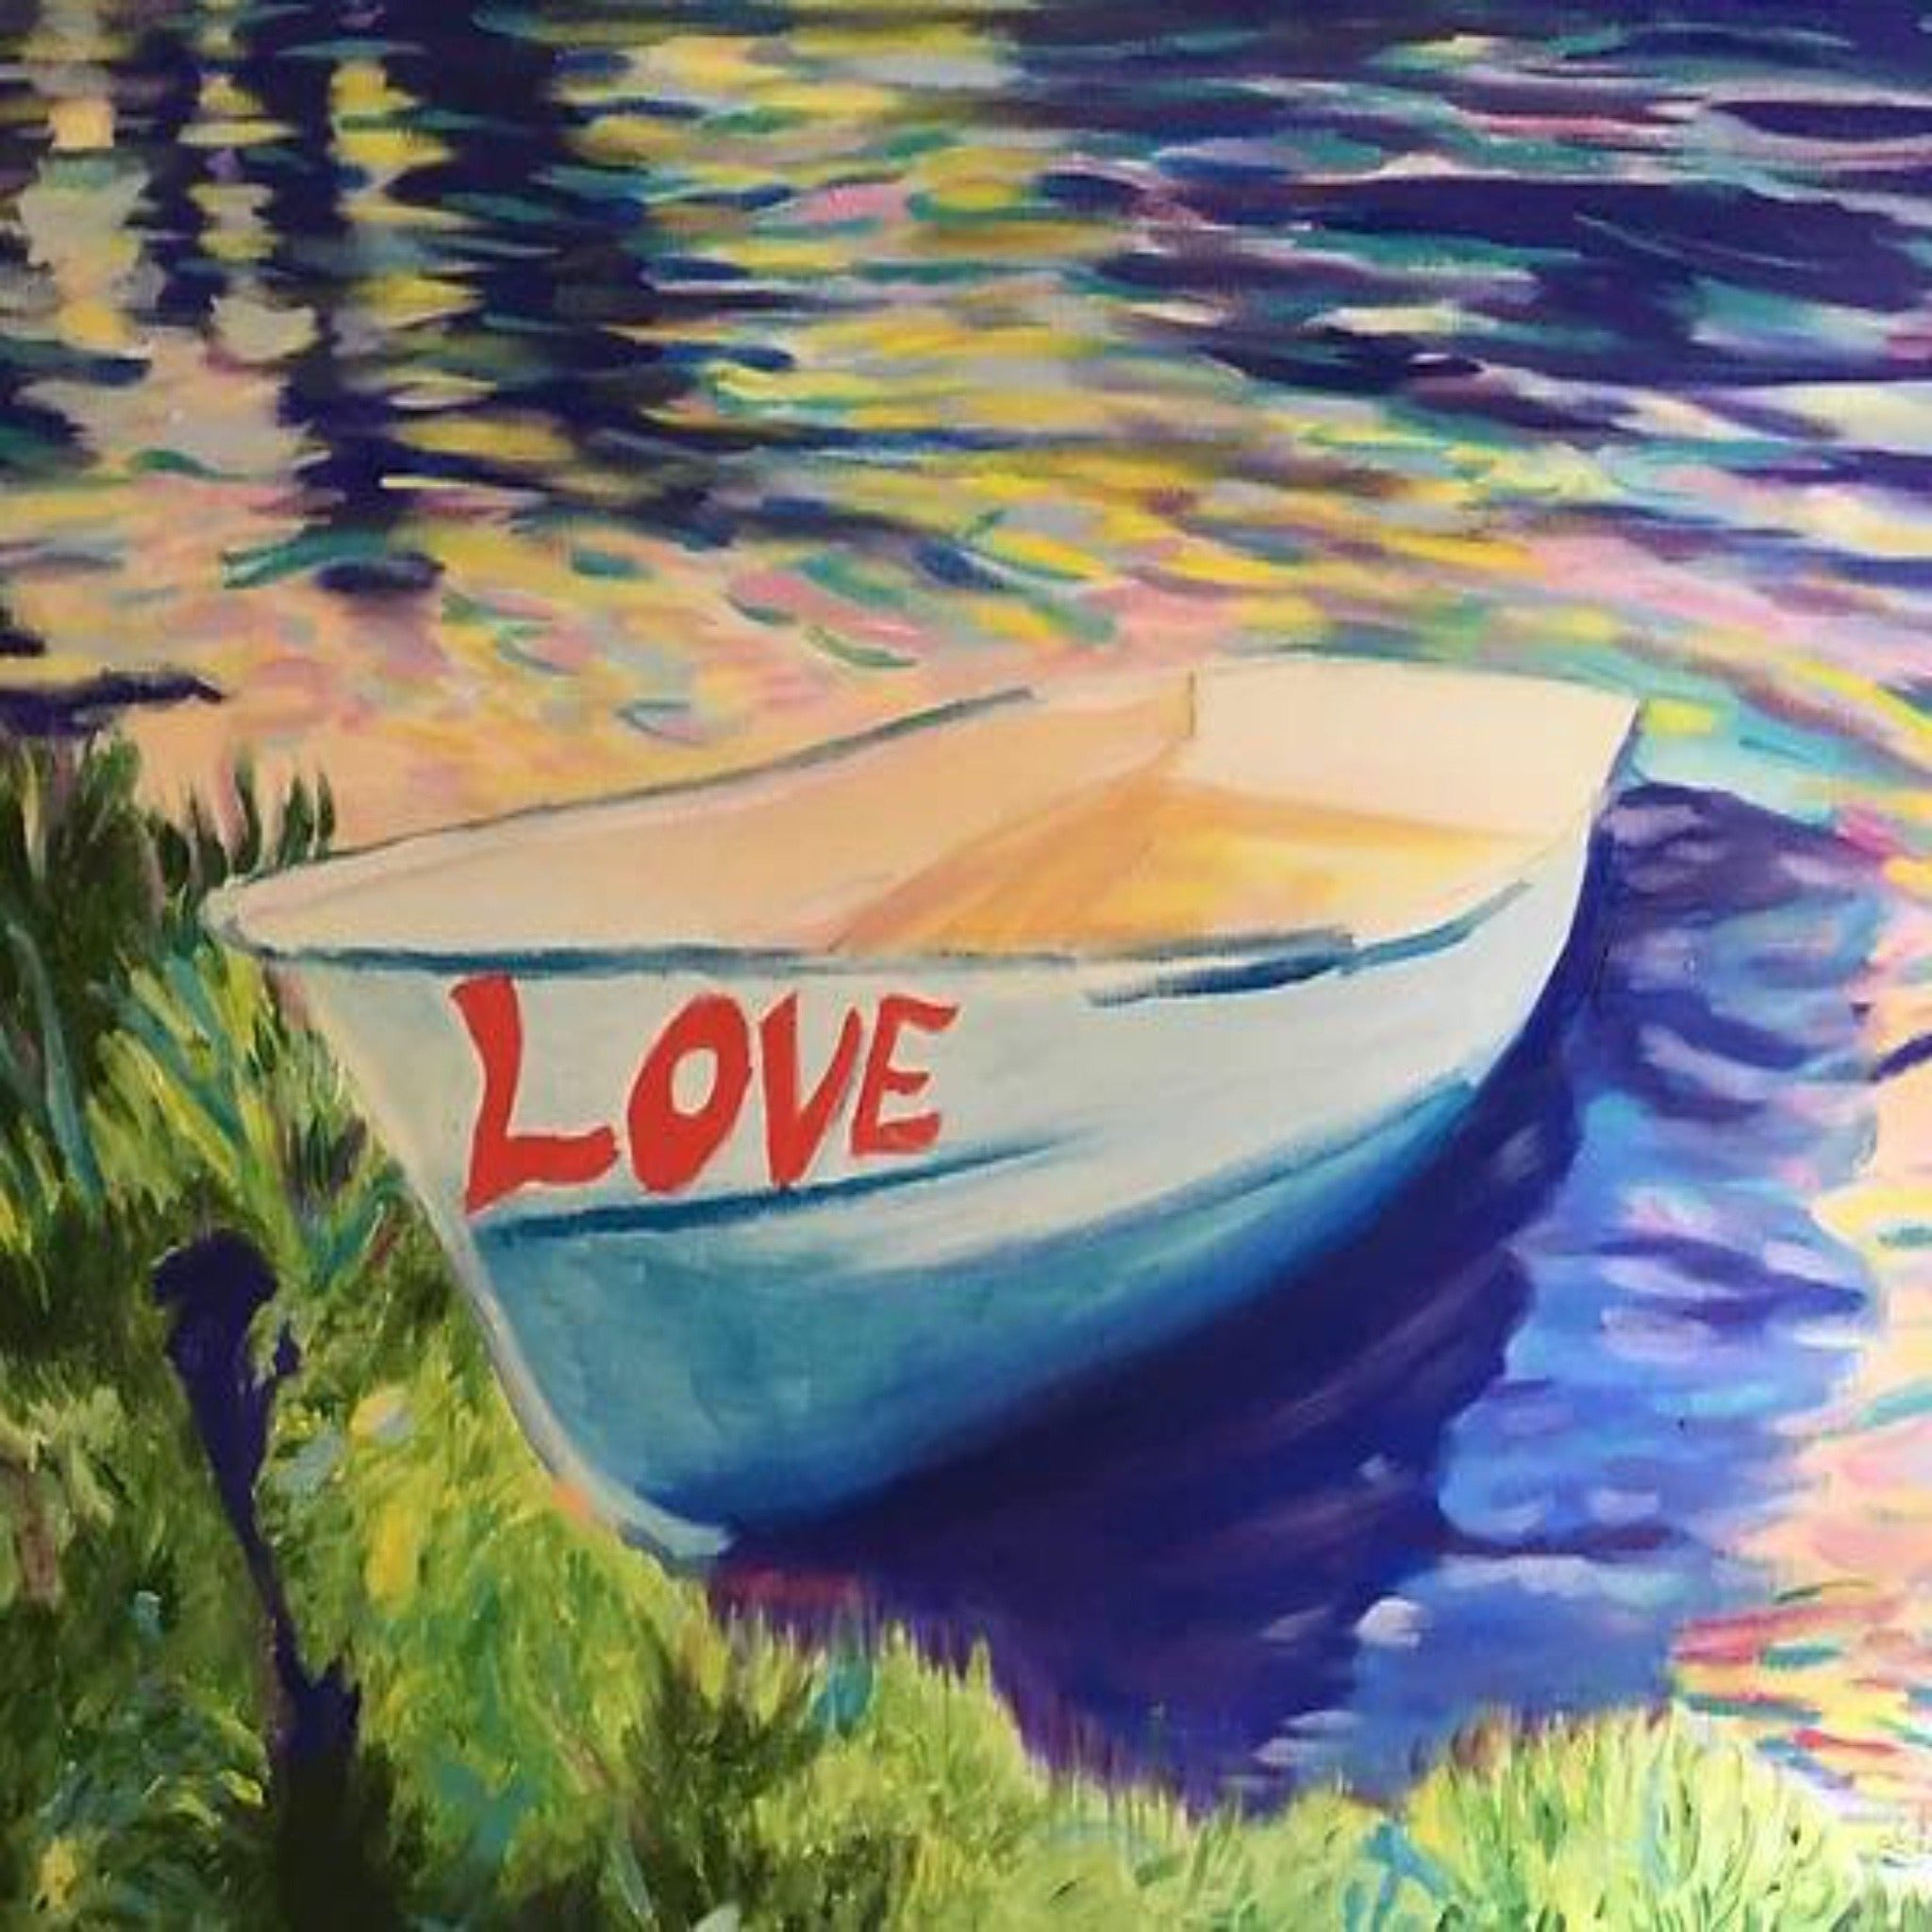 Love Boat painted by Life Arts Designs